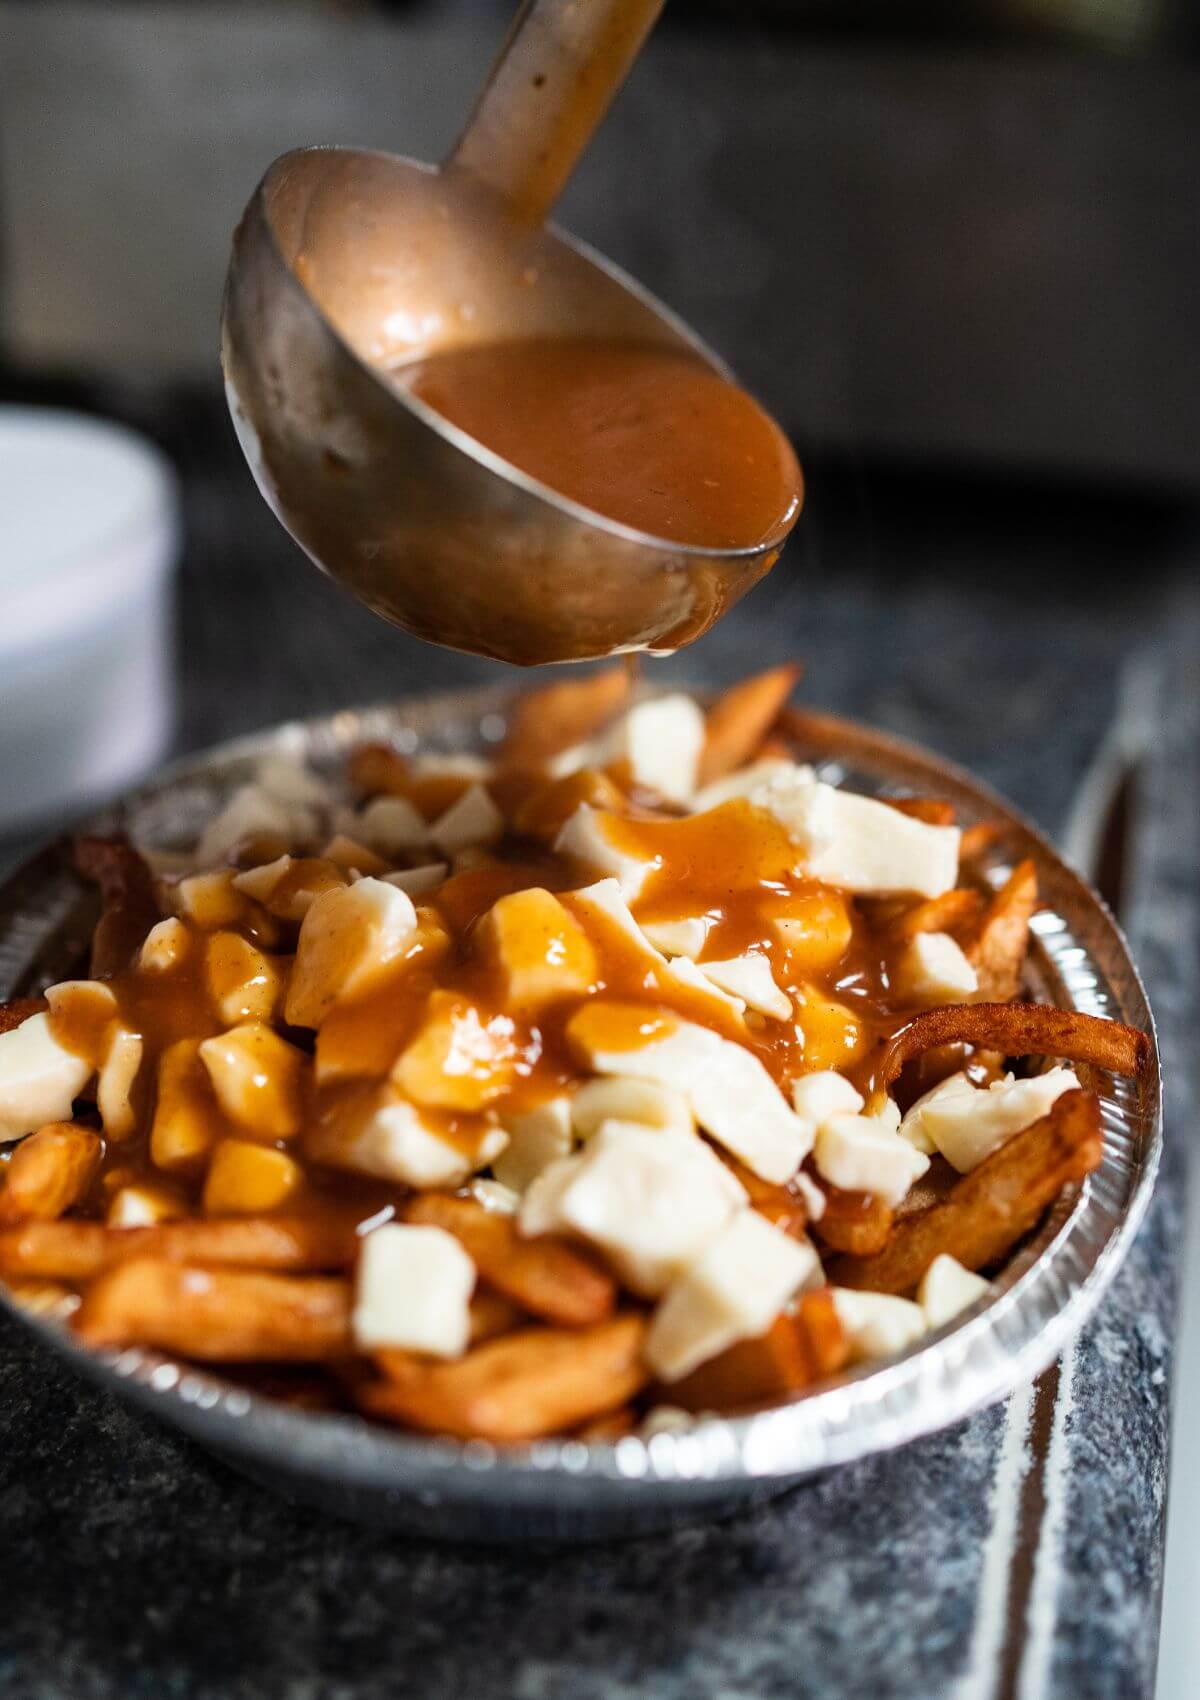 Poutine is famous in Canada